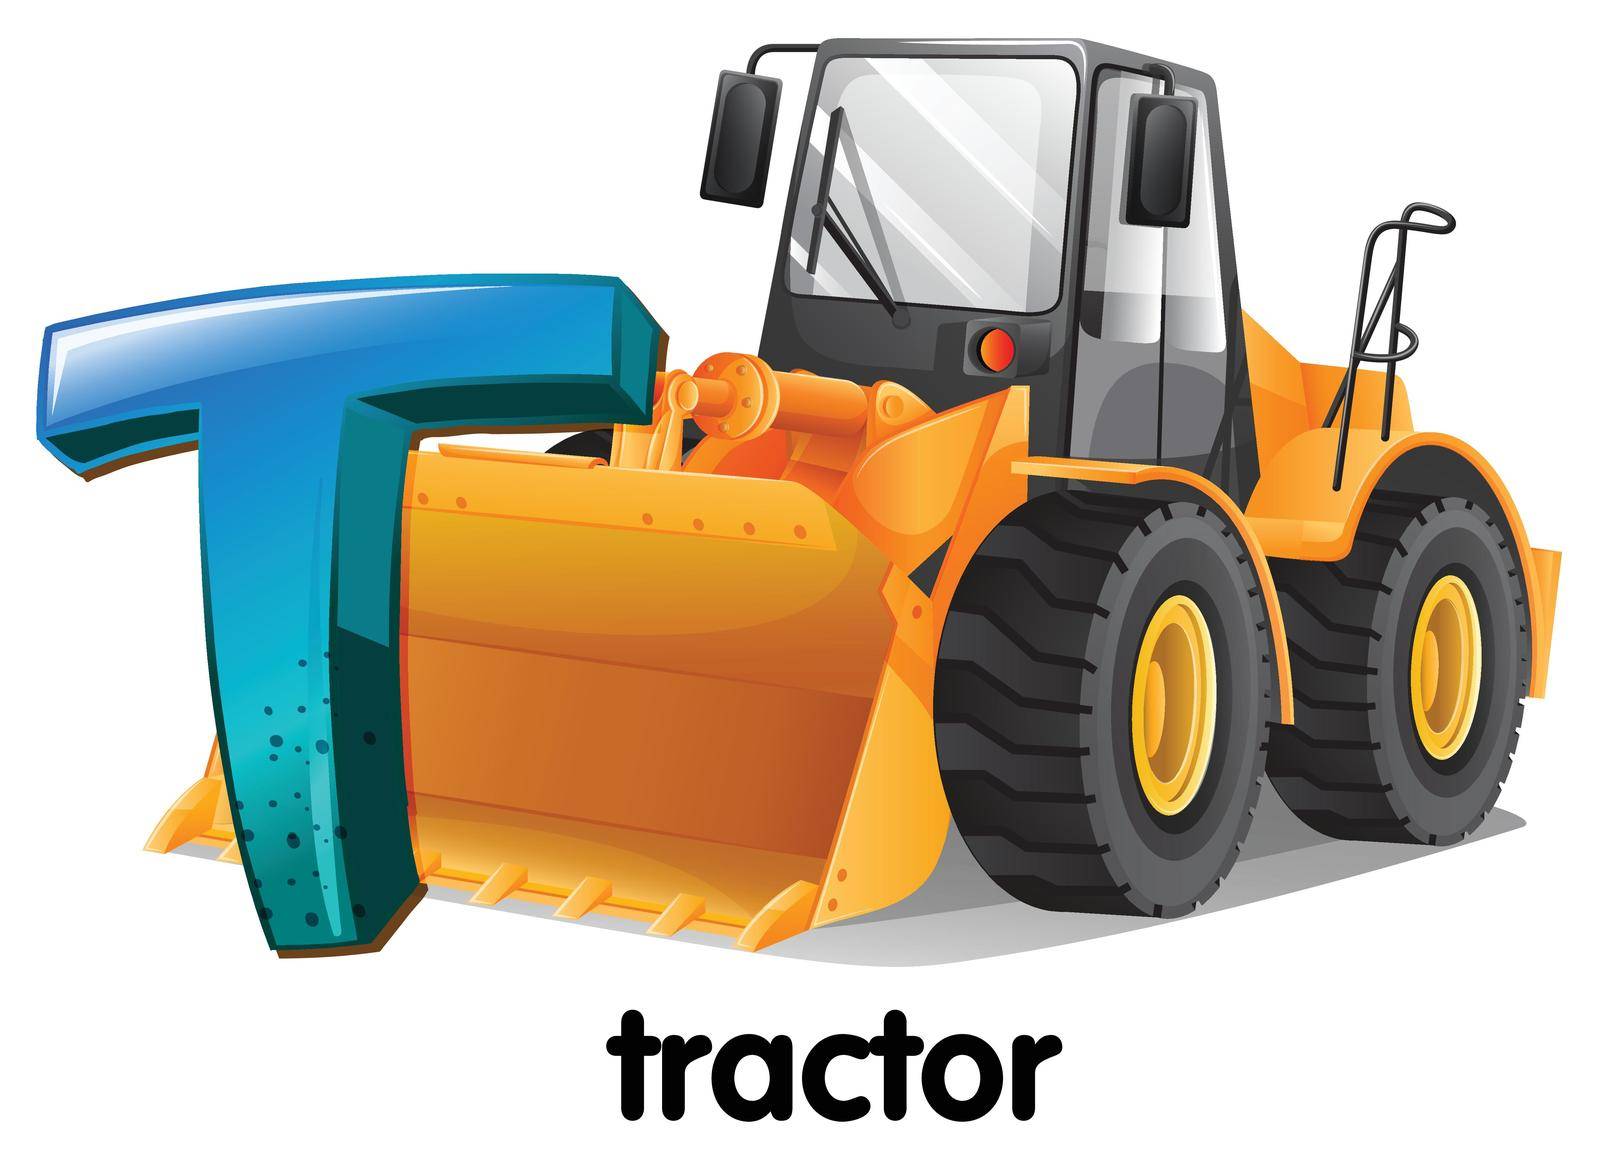 Illustration of a letter T for tractor on a white background